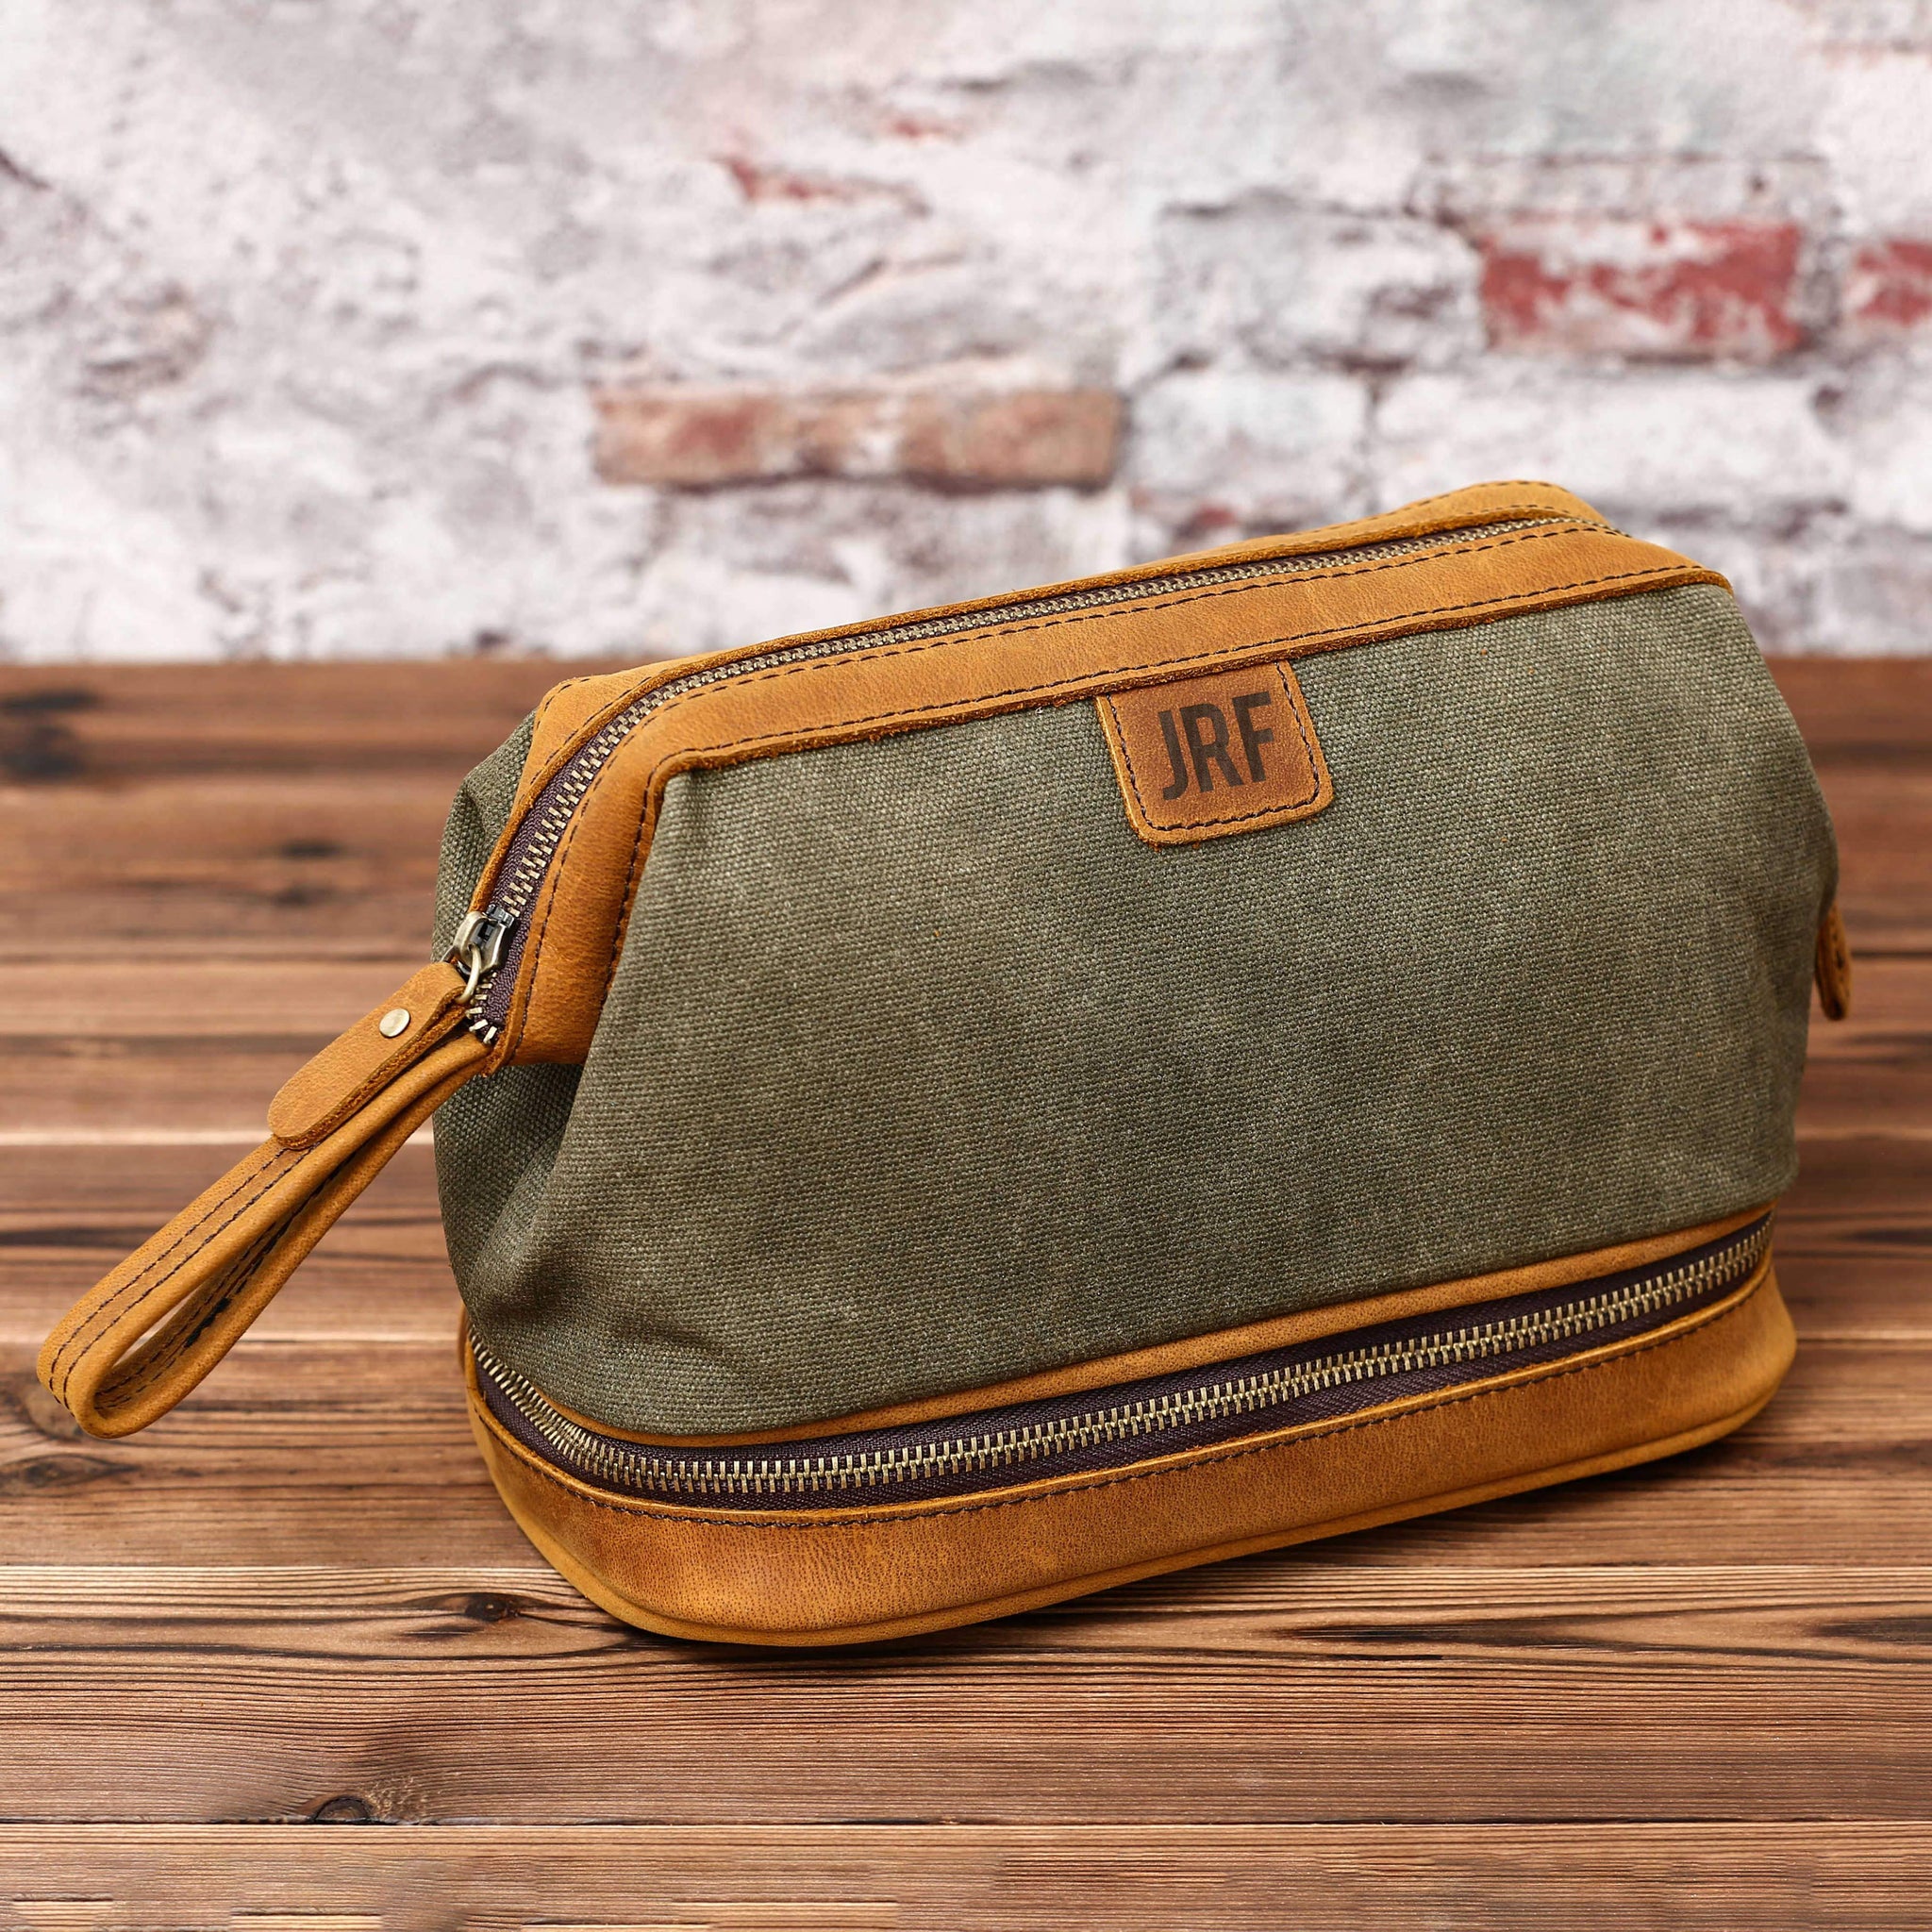 Personalized Groomsmen Gifts, Waxed Canvas Toiletry Bag with Monogram, Dopp  Kit, Best Man Gift